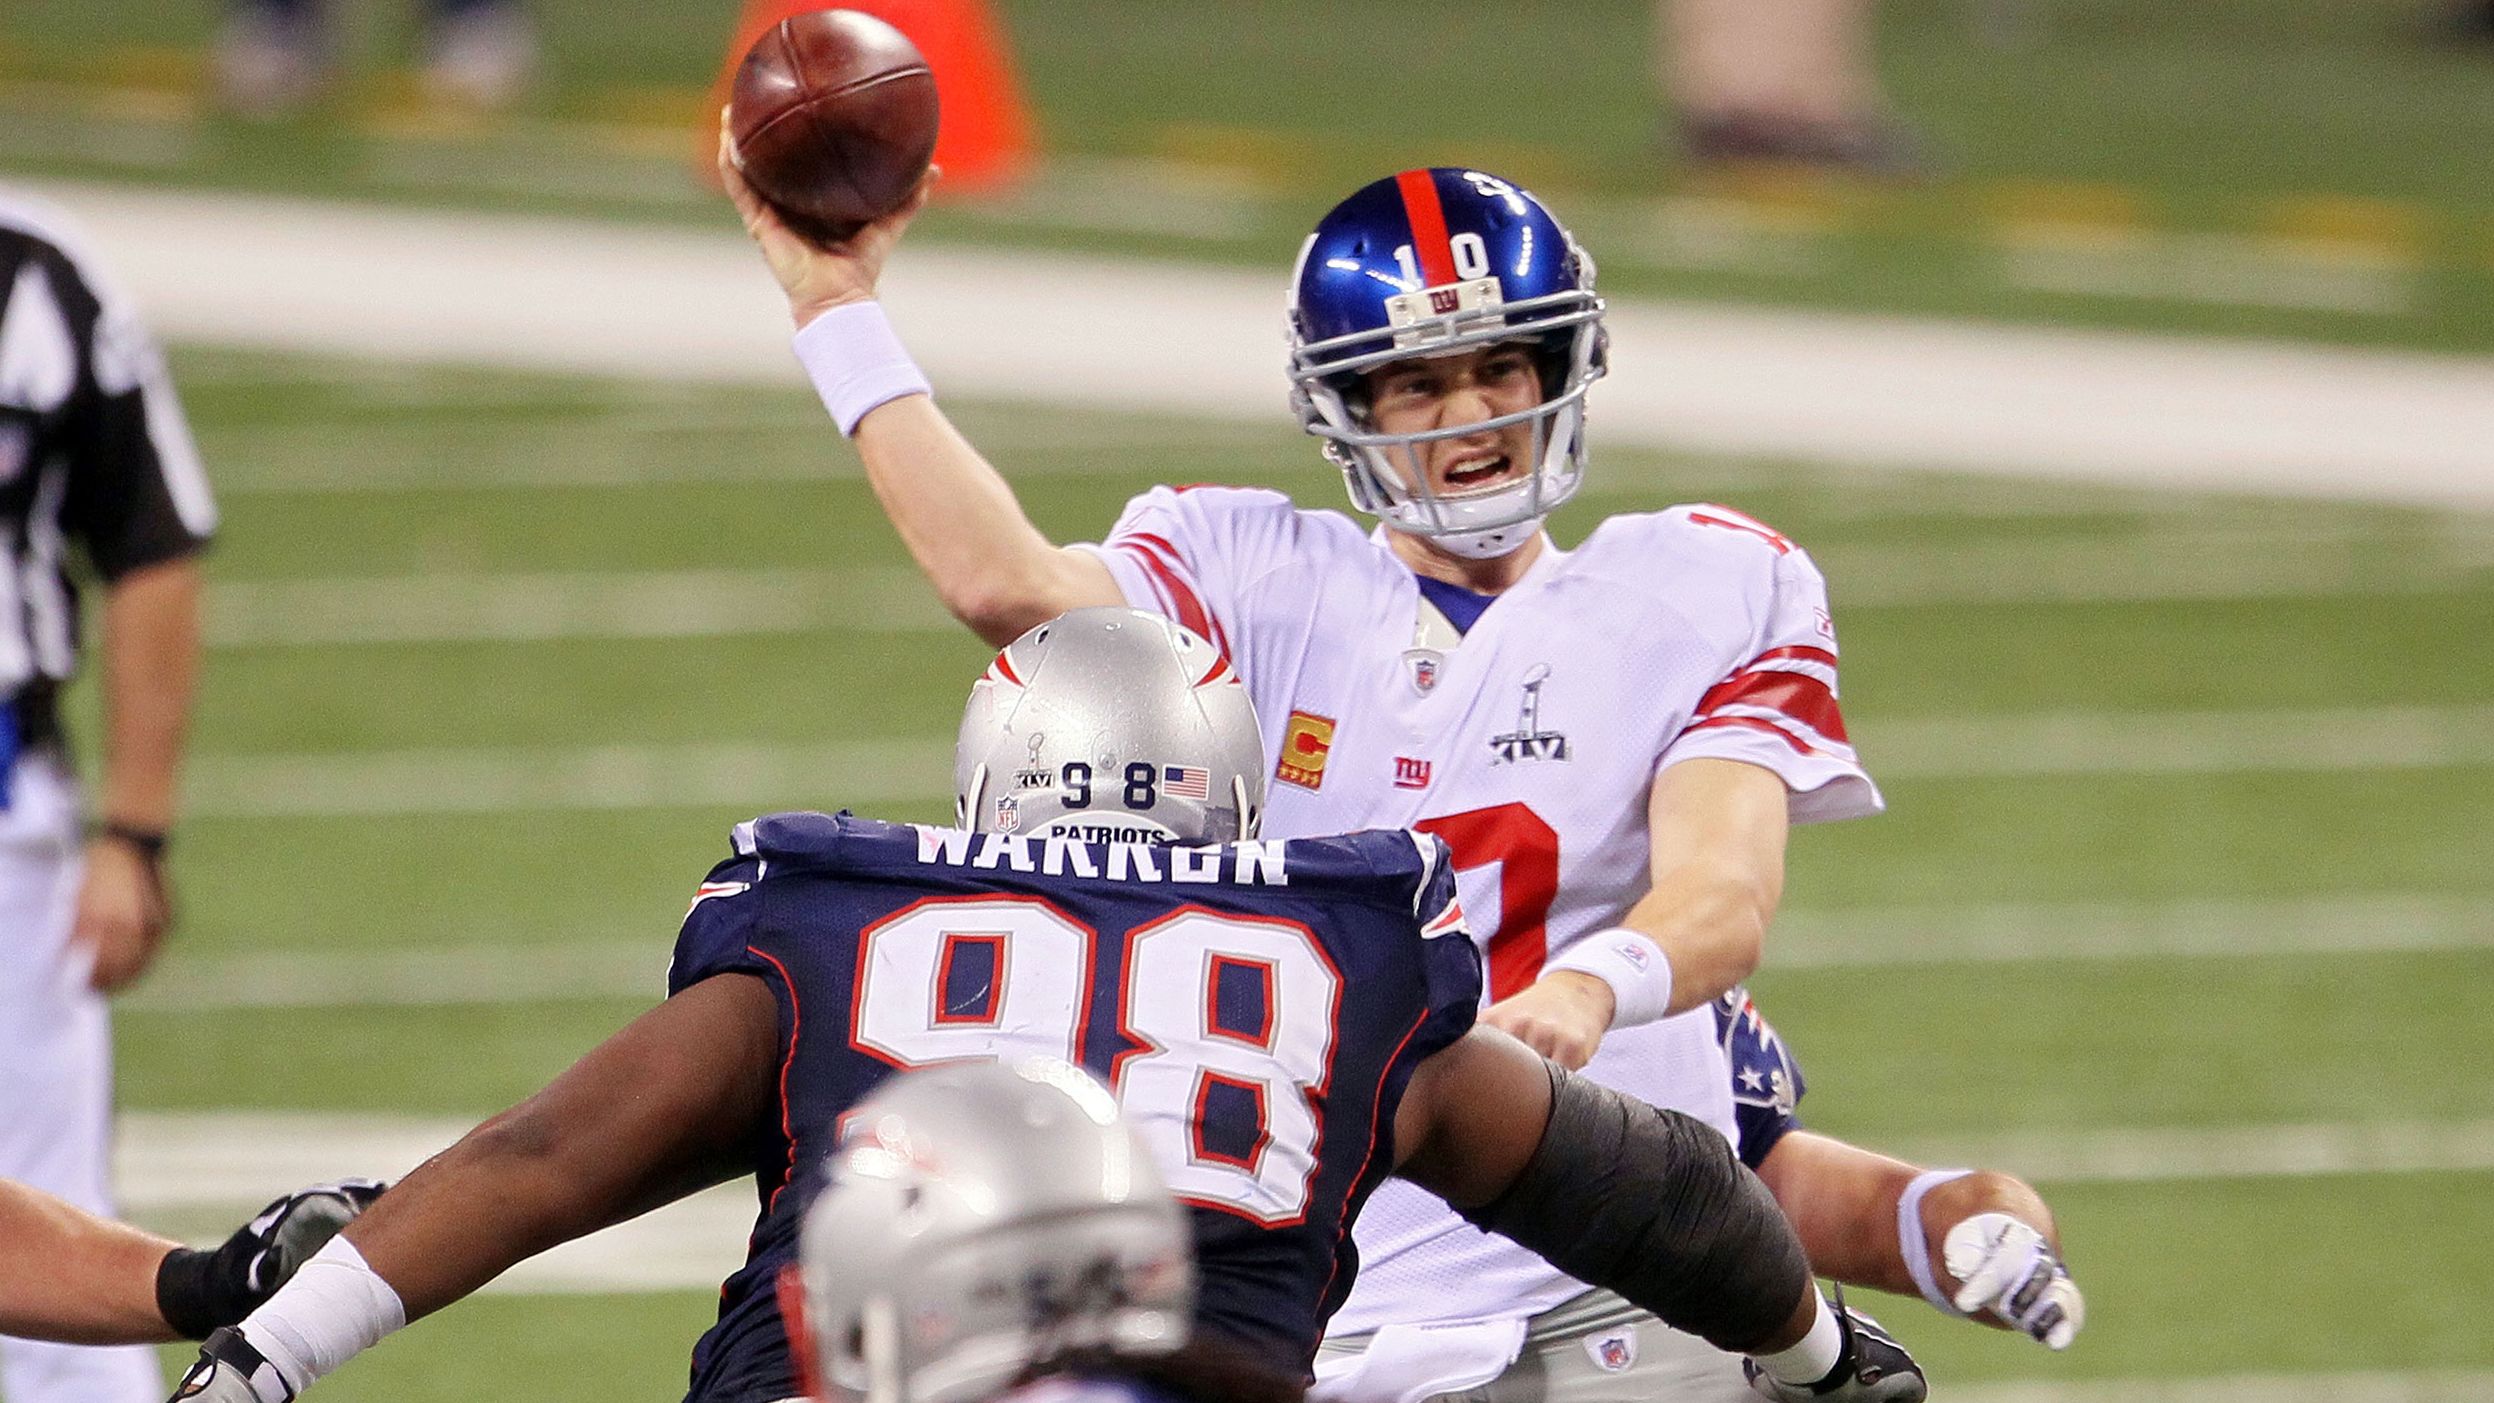 <strong>Super Bowl XLVI (2012):</strong> Eli Manning did it to the Patriots again, as the New York Giants beat New England in a Super Bowl rematch from 2008. Manning had 296 yards passing this time as the Giants won 21-17.